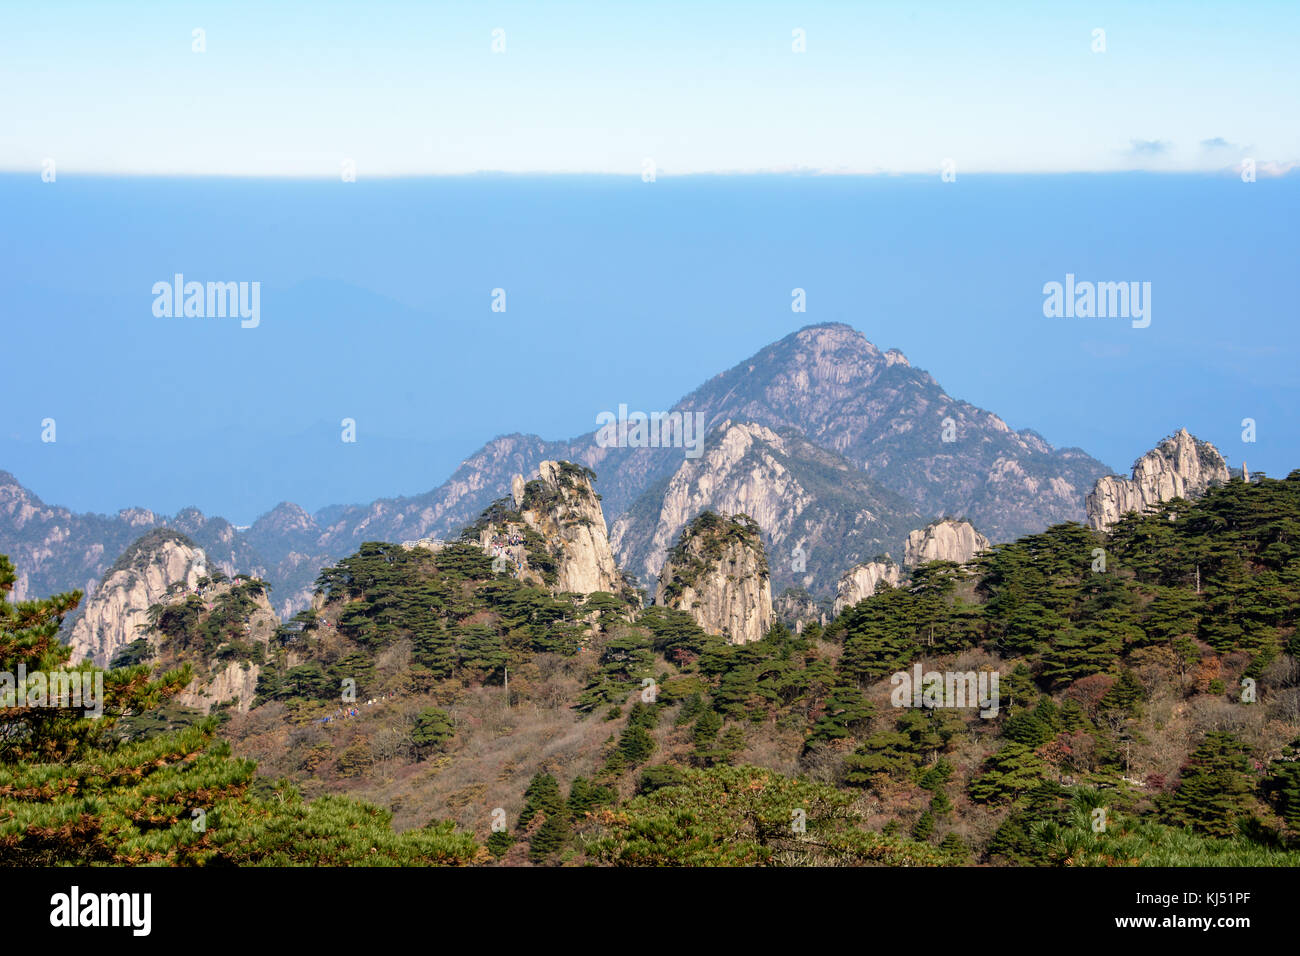 View from above looking over some peaks of Yellow Mountain in China Stock Photo